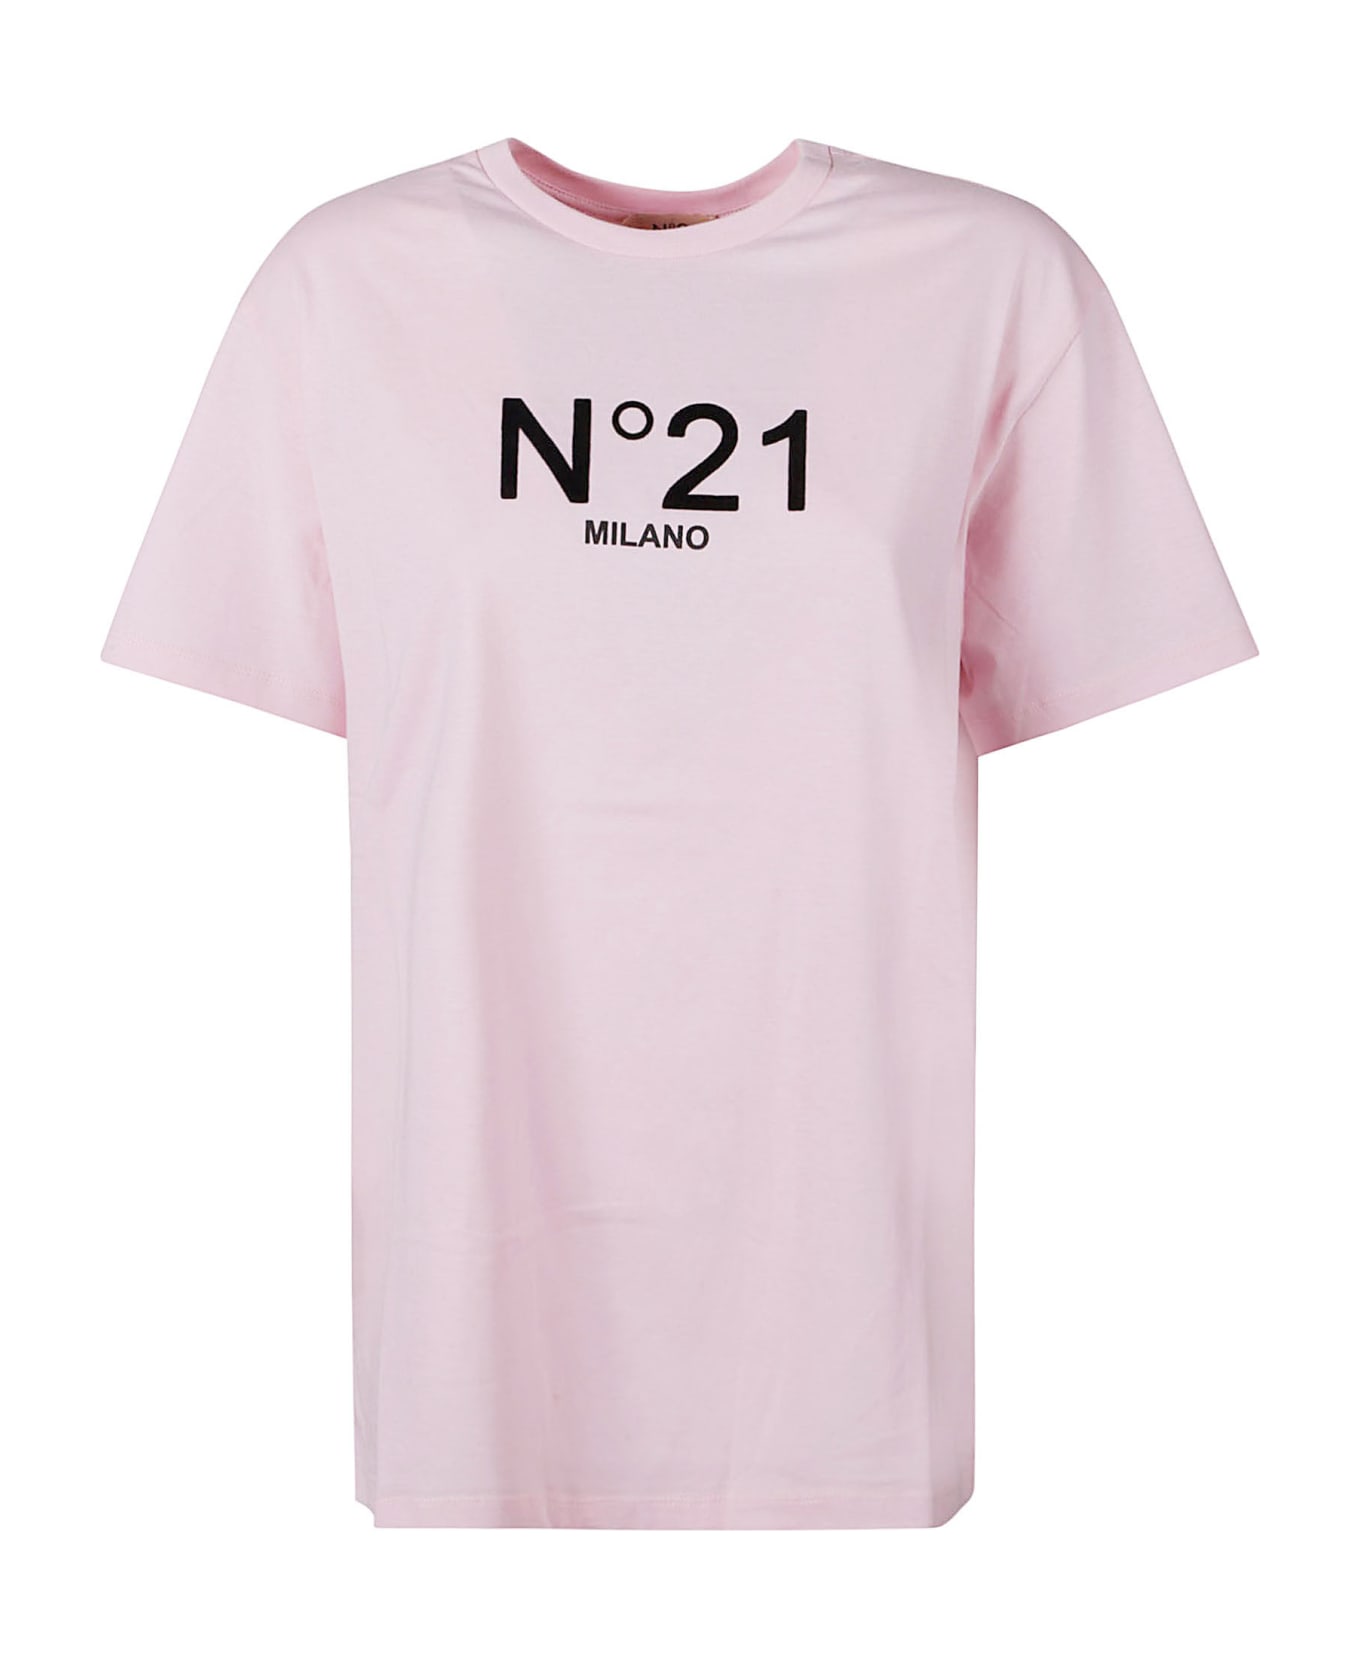 N.21 Milano T-shirt - Red Tシャツ